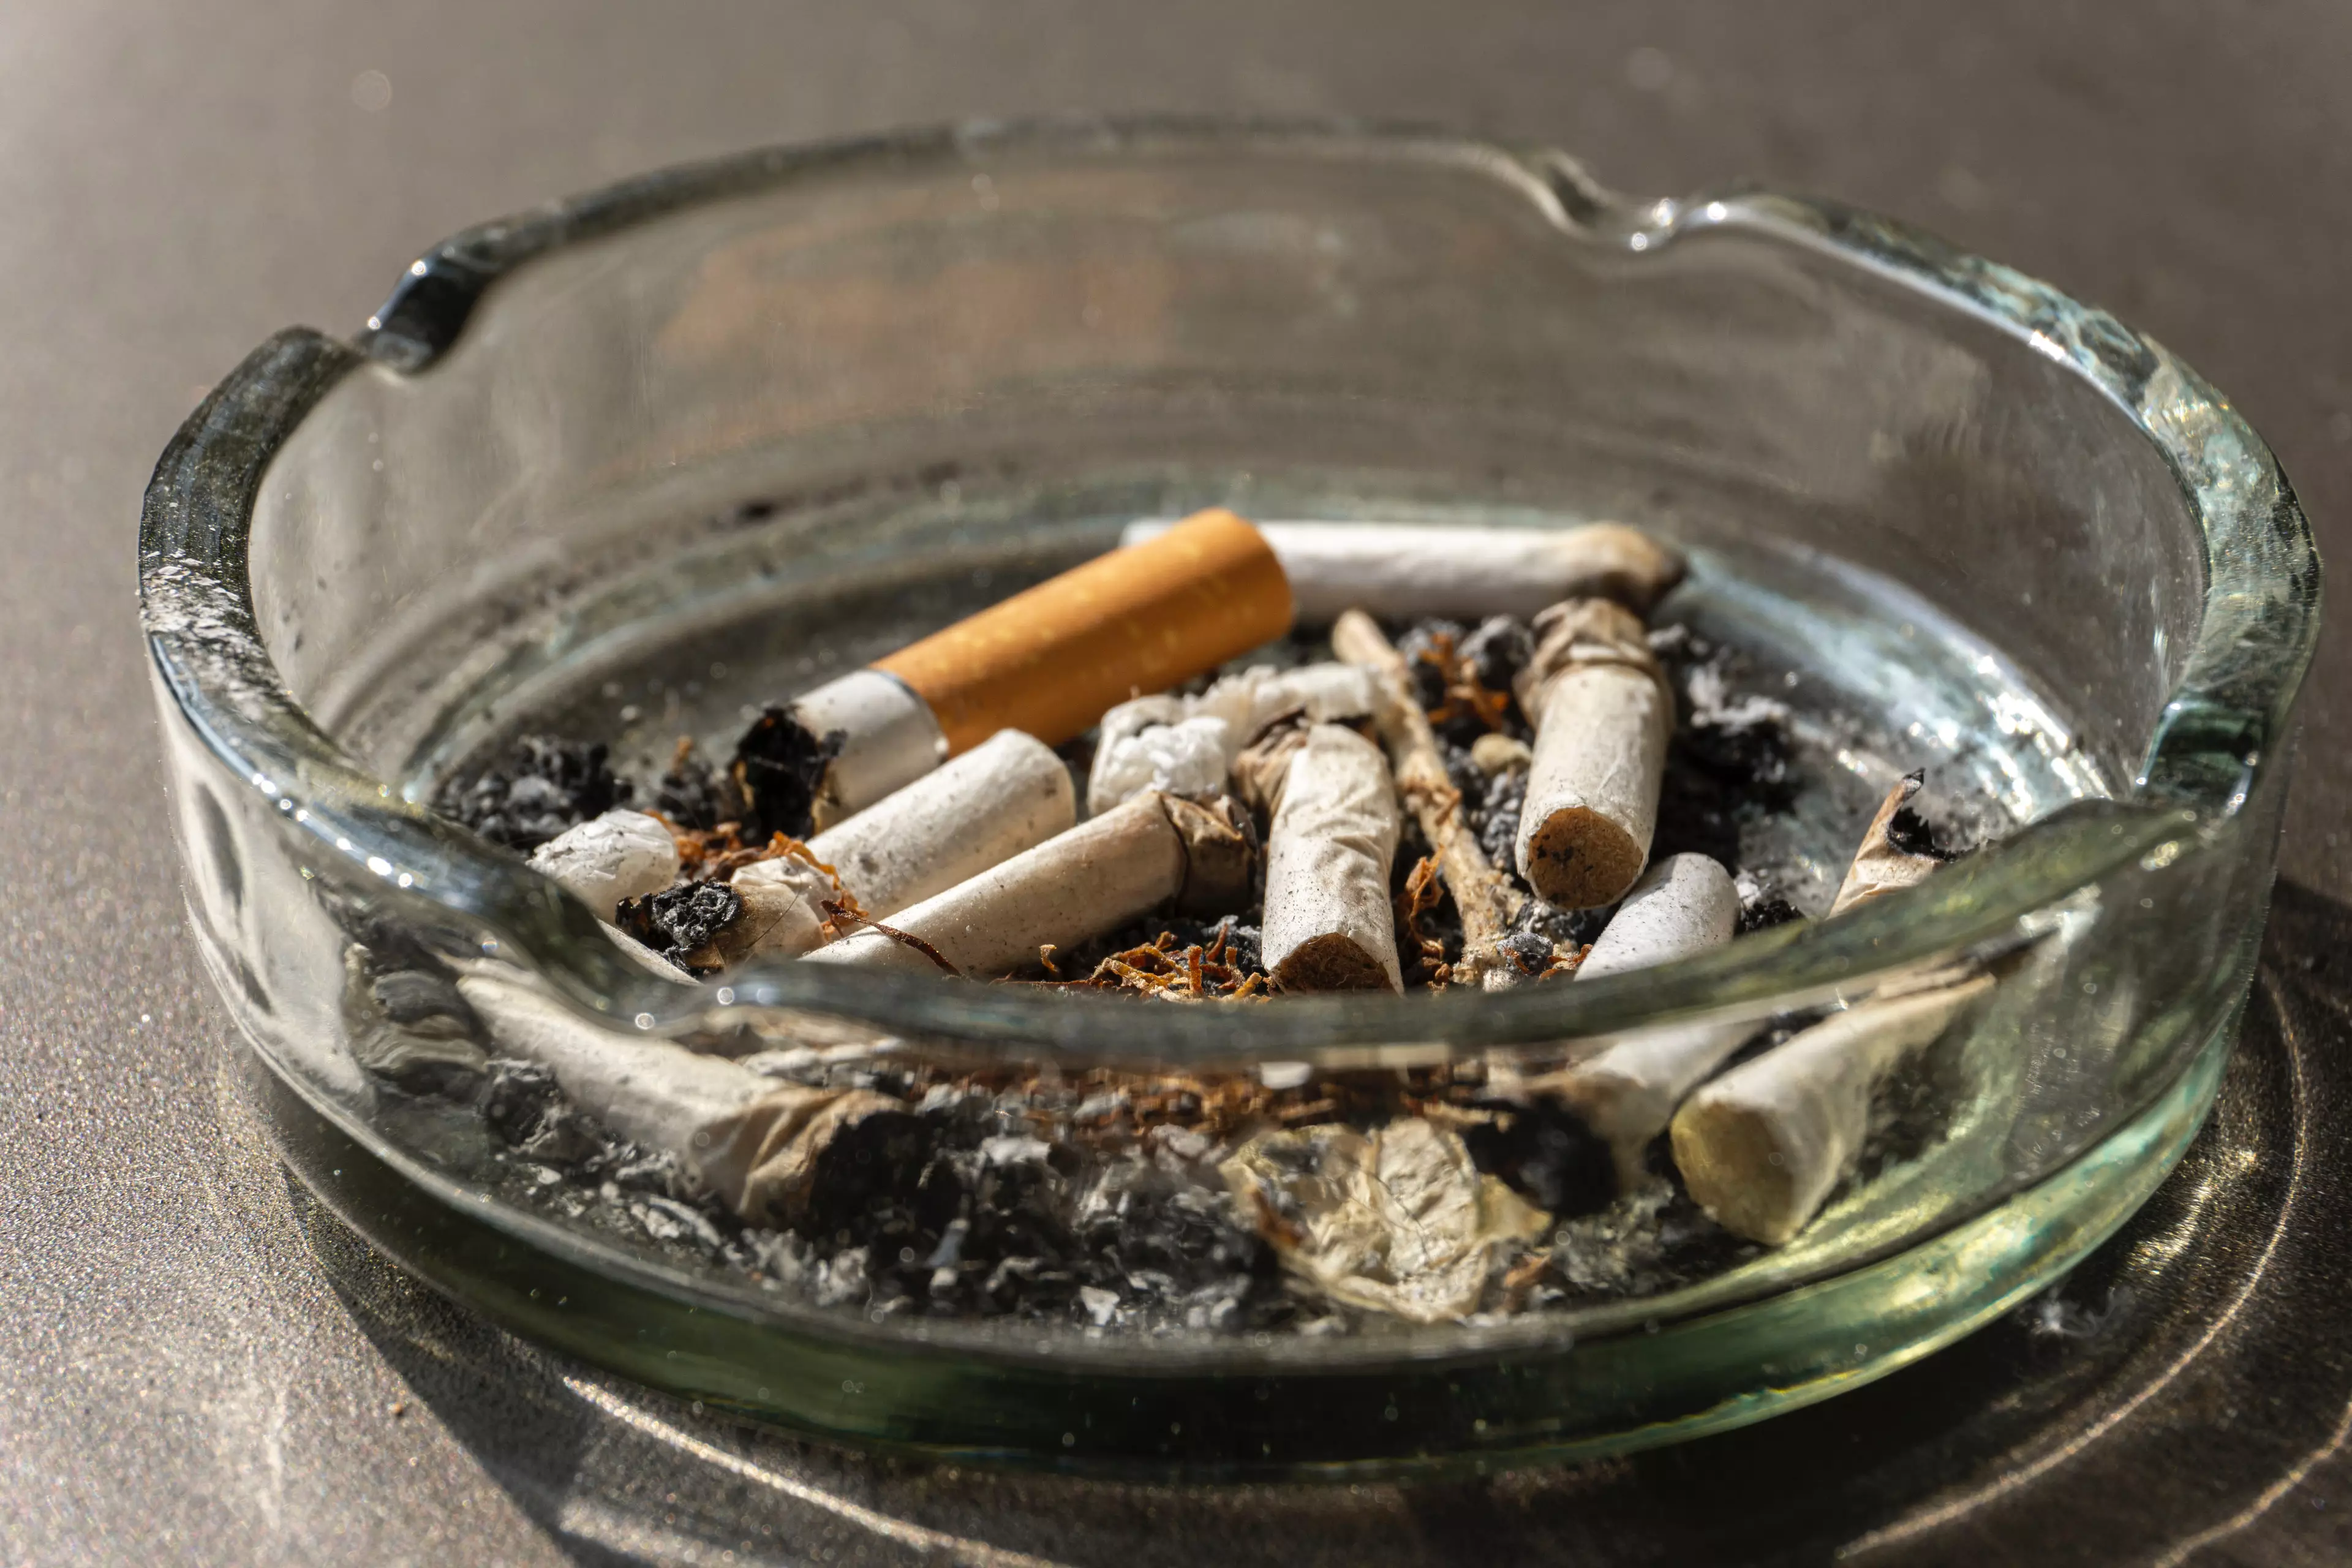 Smoking in outdoor public spaces could be made illegal (